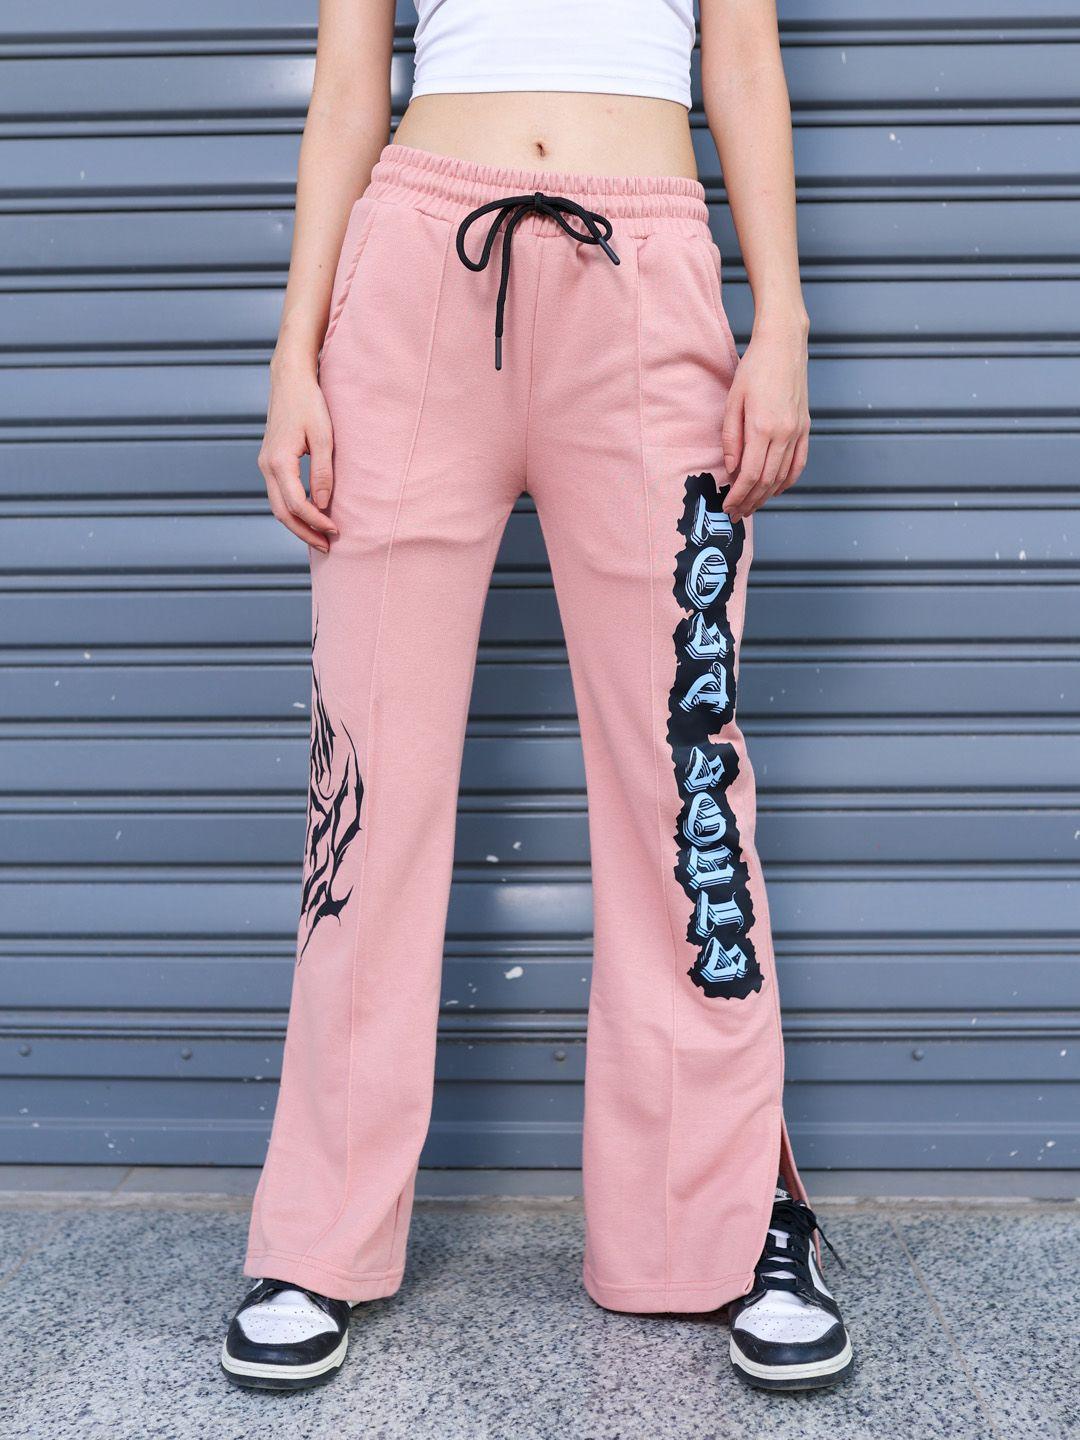 stylecast-x-hersheinbox-women-pure-cotton-printed-trousers